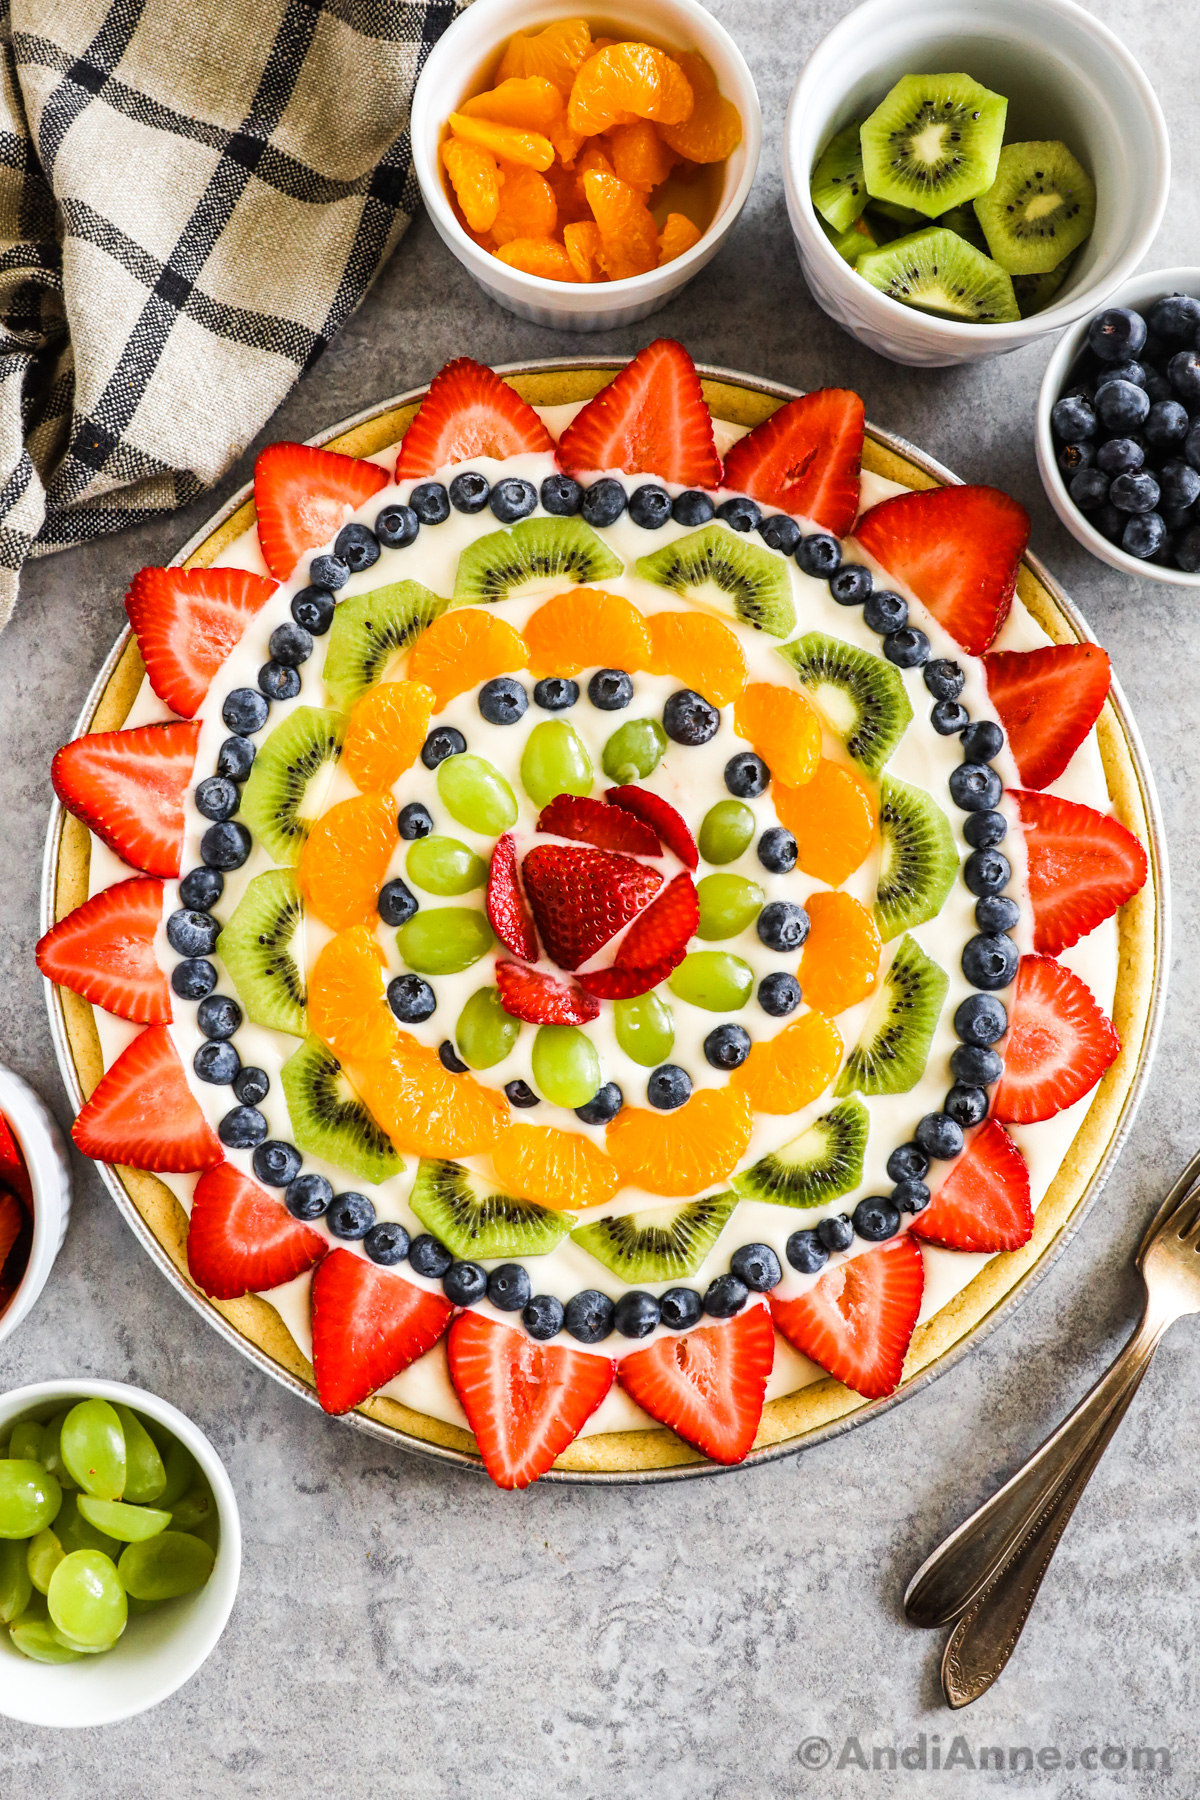 A sugar cookie crust fruit pizza with bowls of fruit beside it.